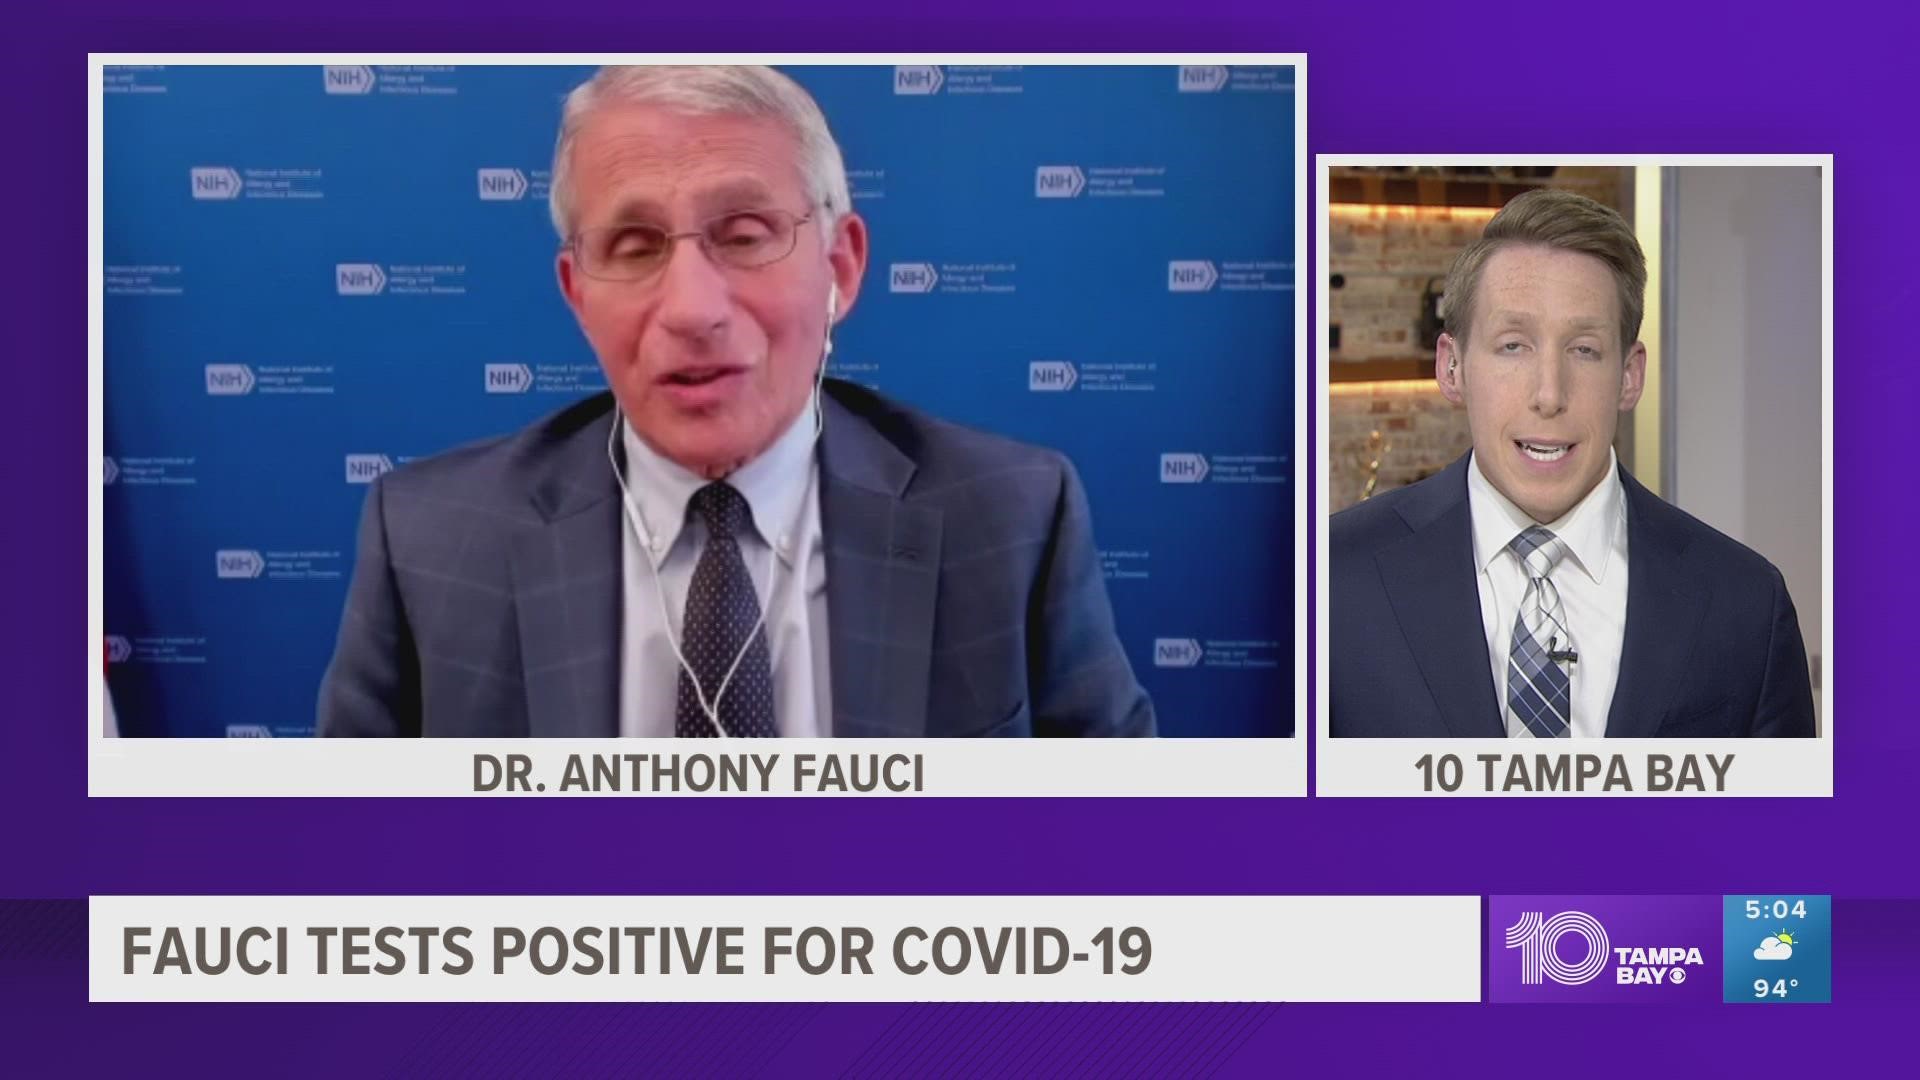 Fauci has been the face of the U.S.'s pandemic response since 2020.